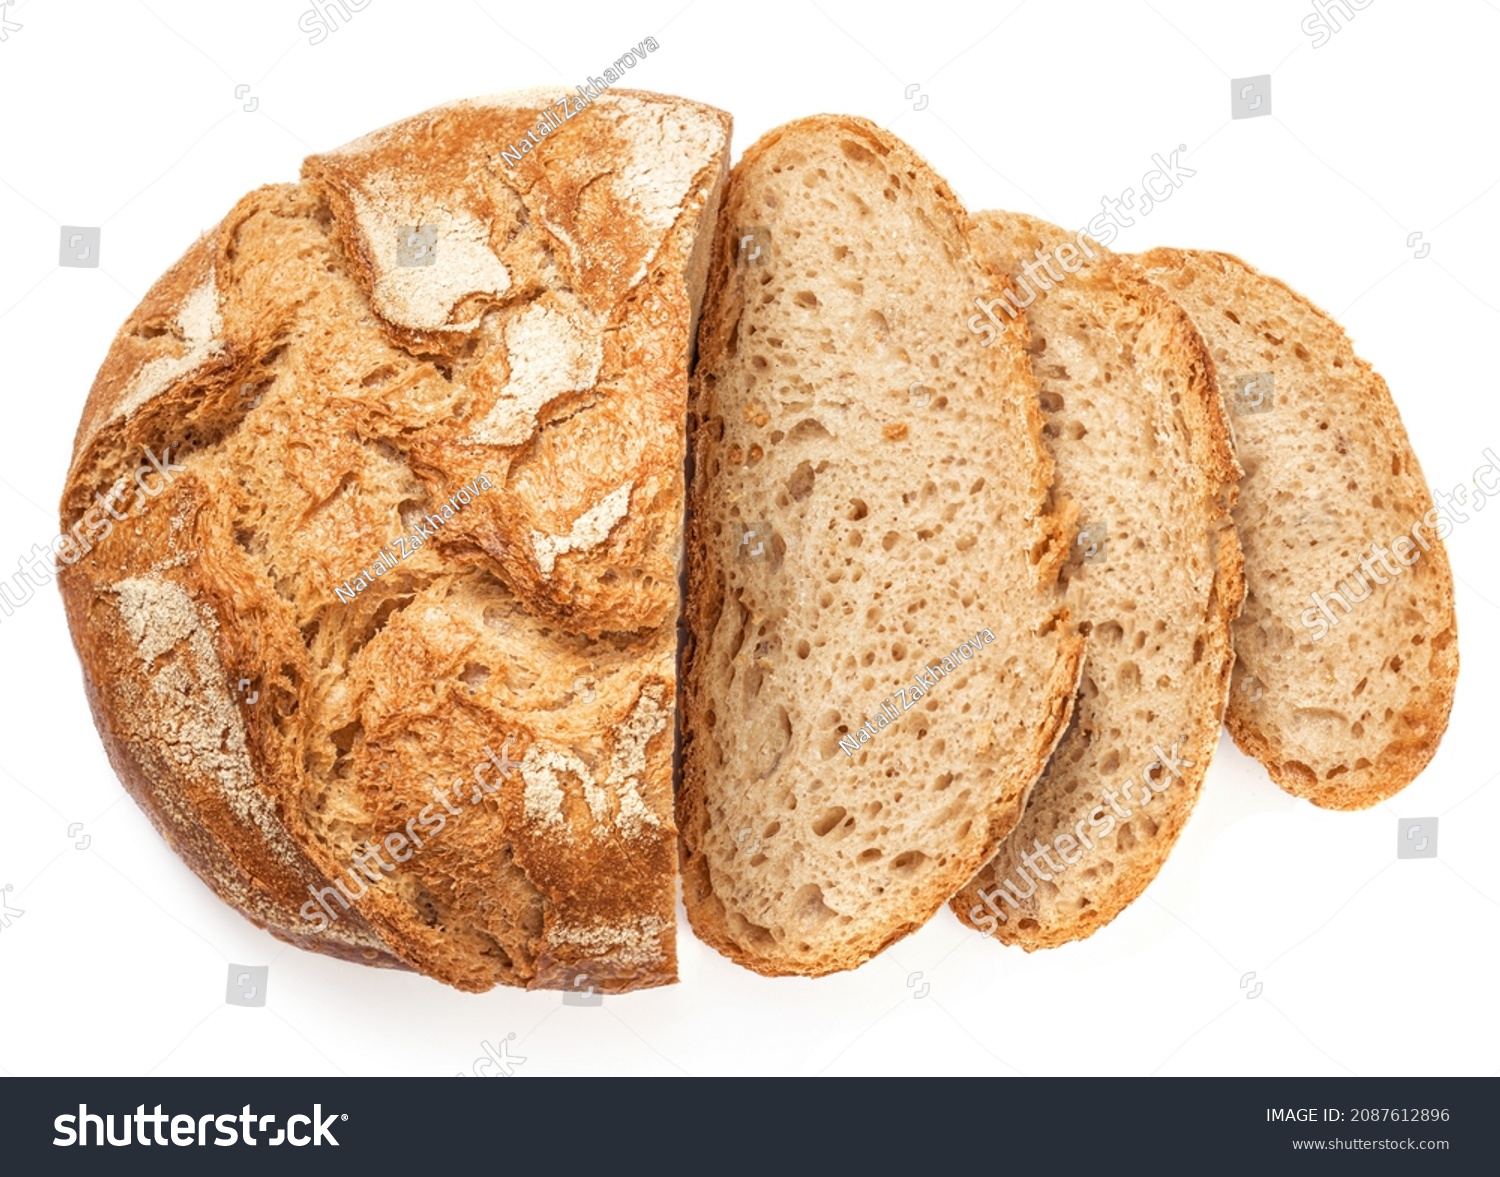 Freshly baked round  Bread isolated on white background.  Sliced, cutted wheat bread. Bakery, rustic  traditional food concept. Top view #2087612896